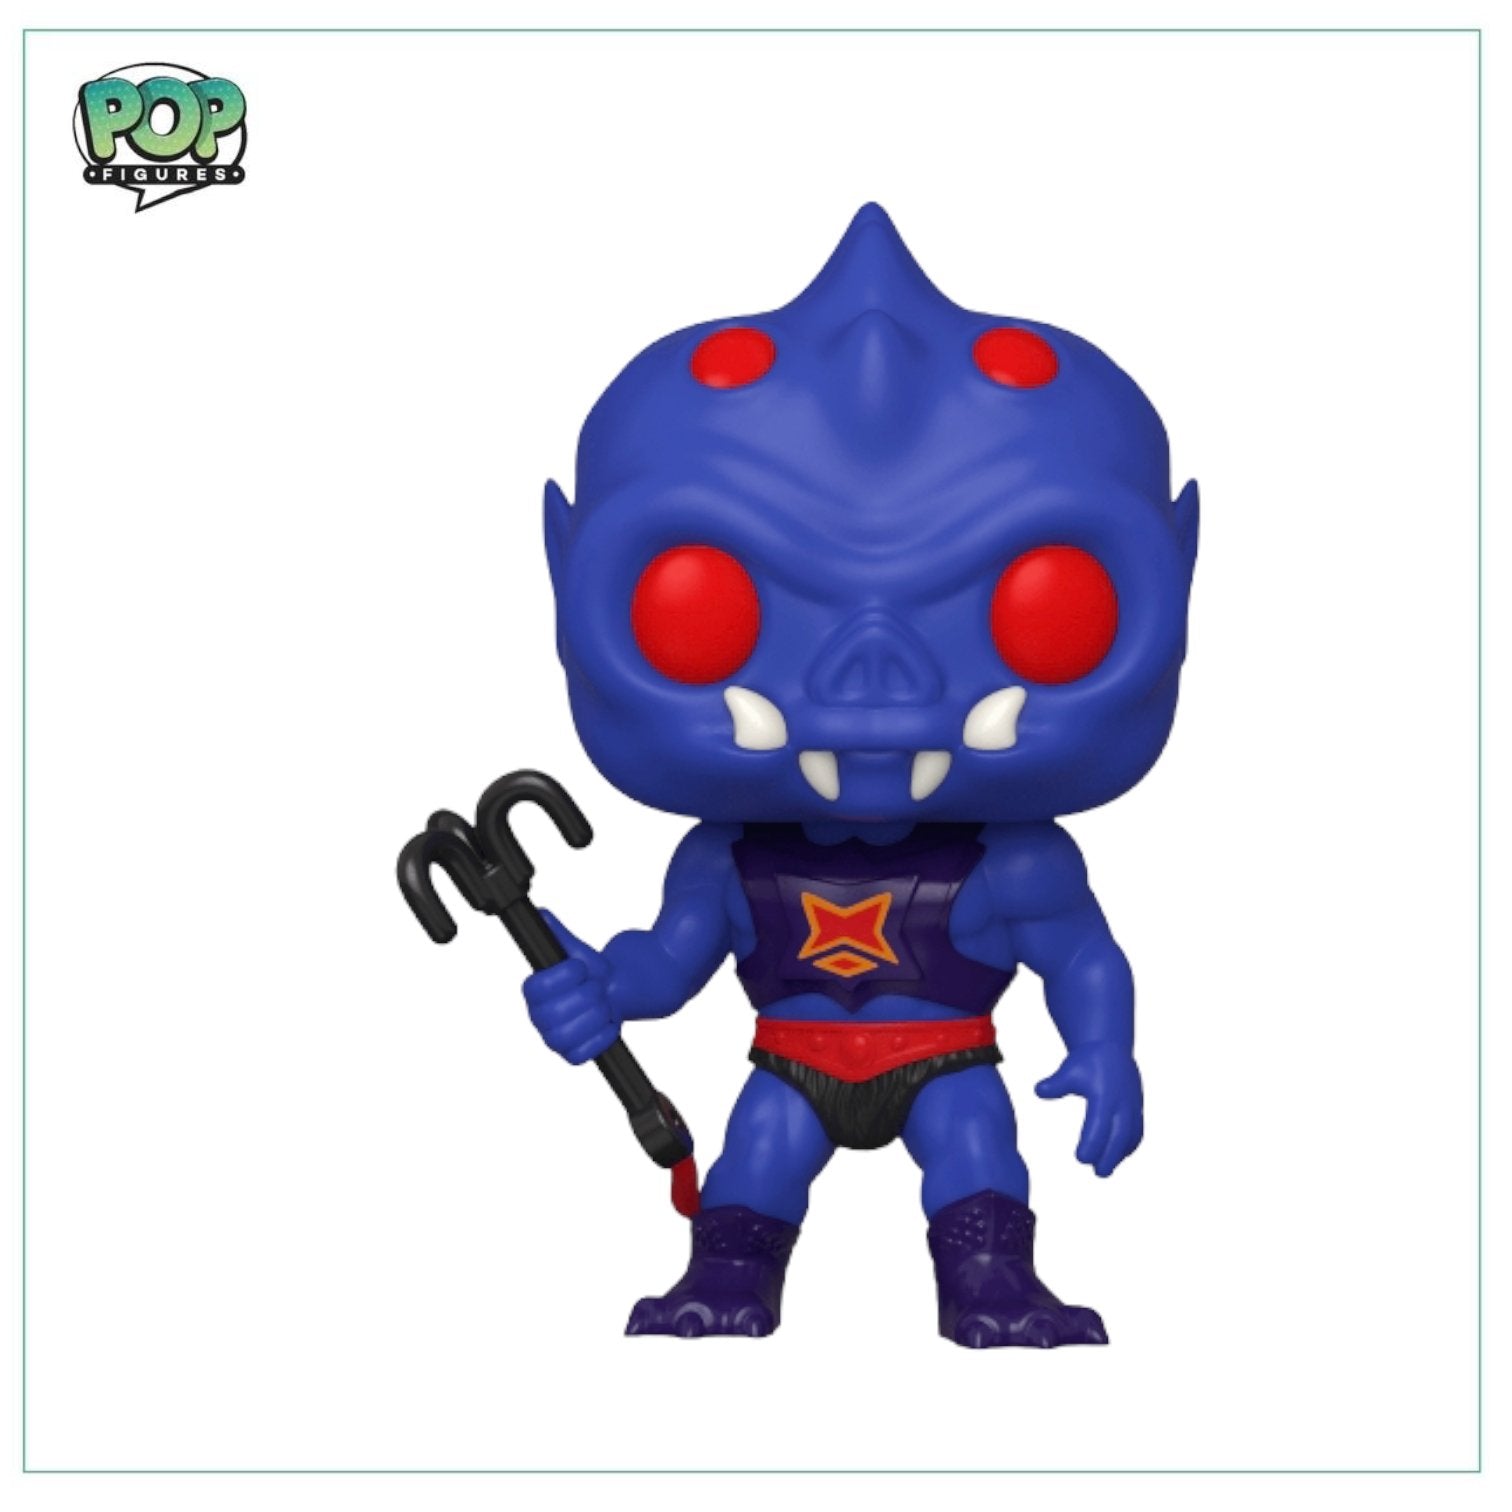 Webster #997 Funko Pop! Masters Of The Universe - Pop Figures | Funko | Pop Funko | Funko Pop